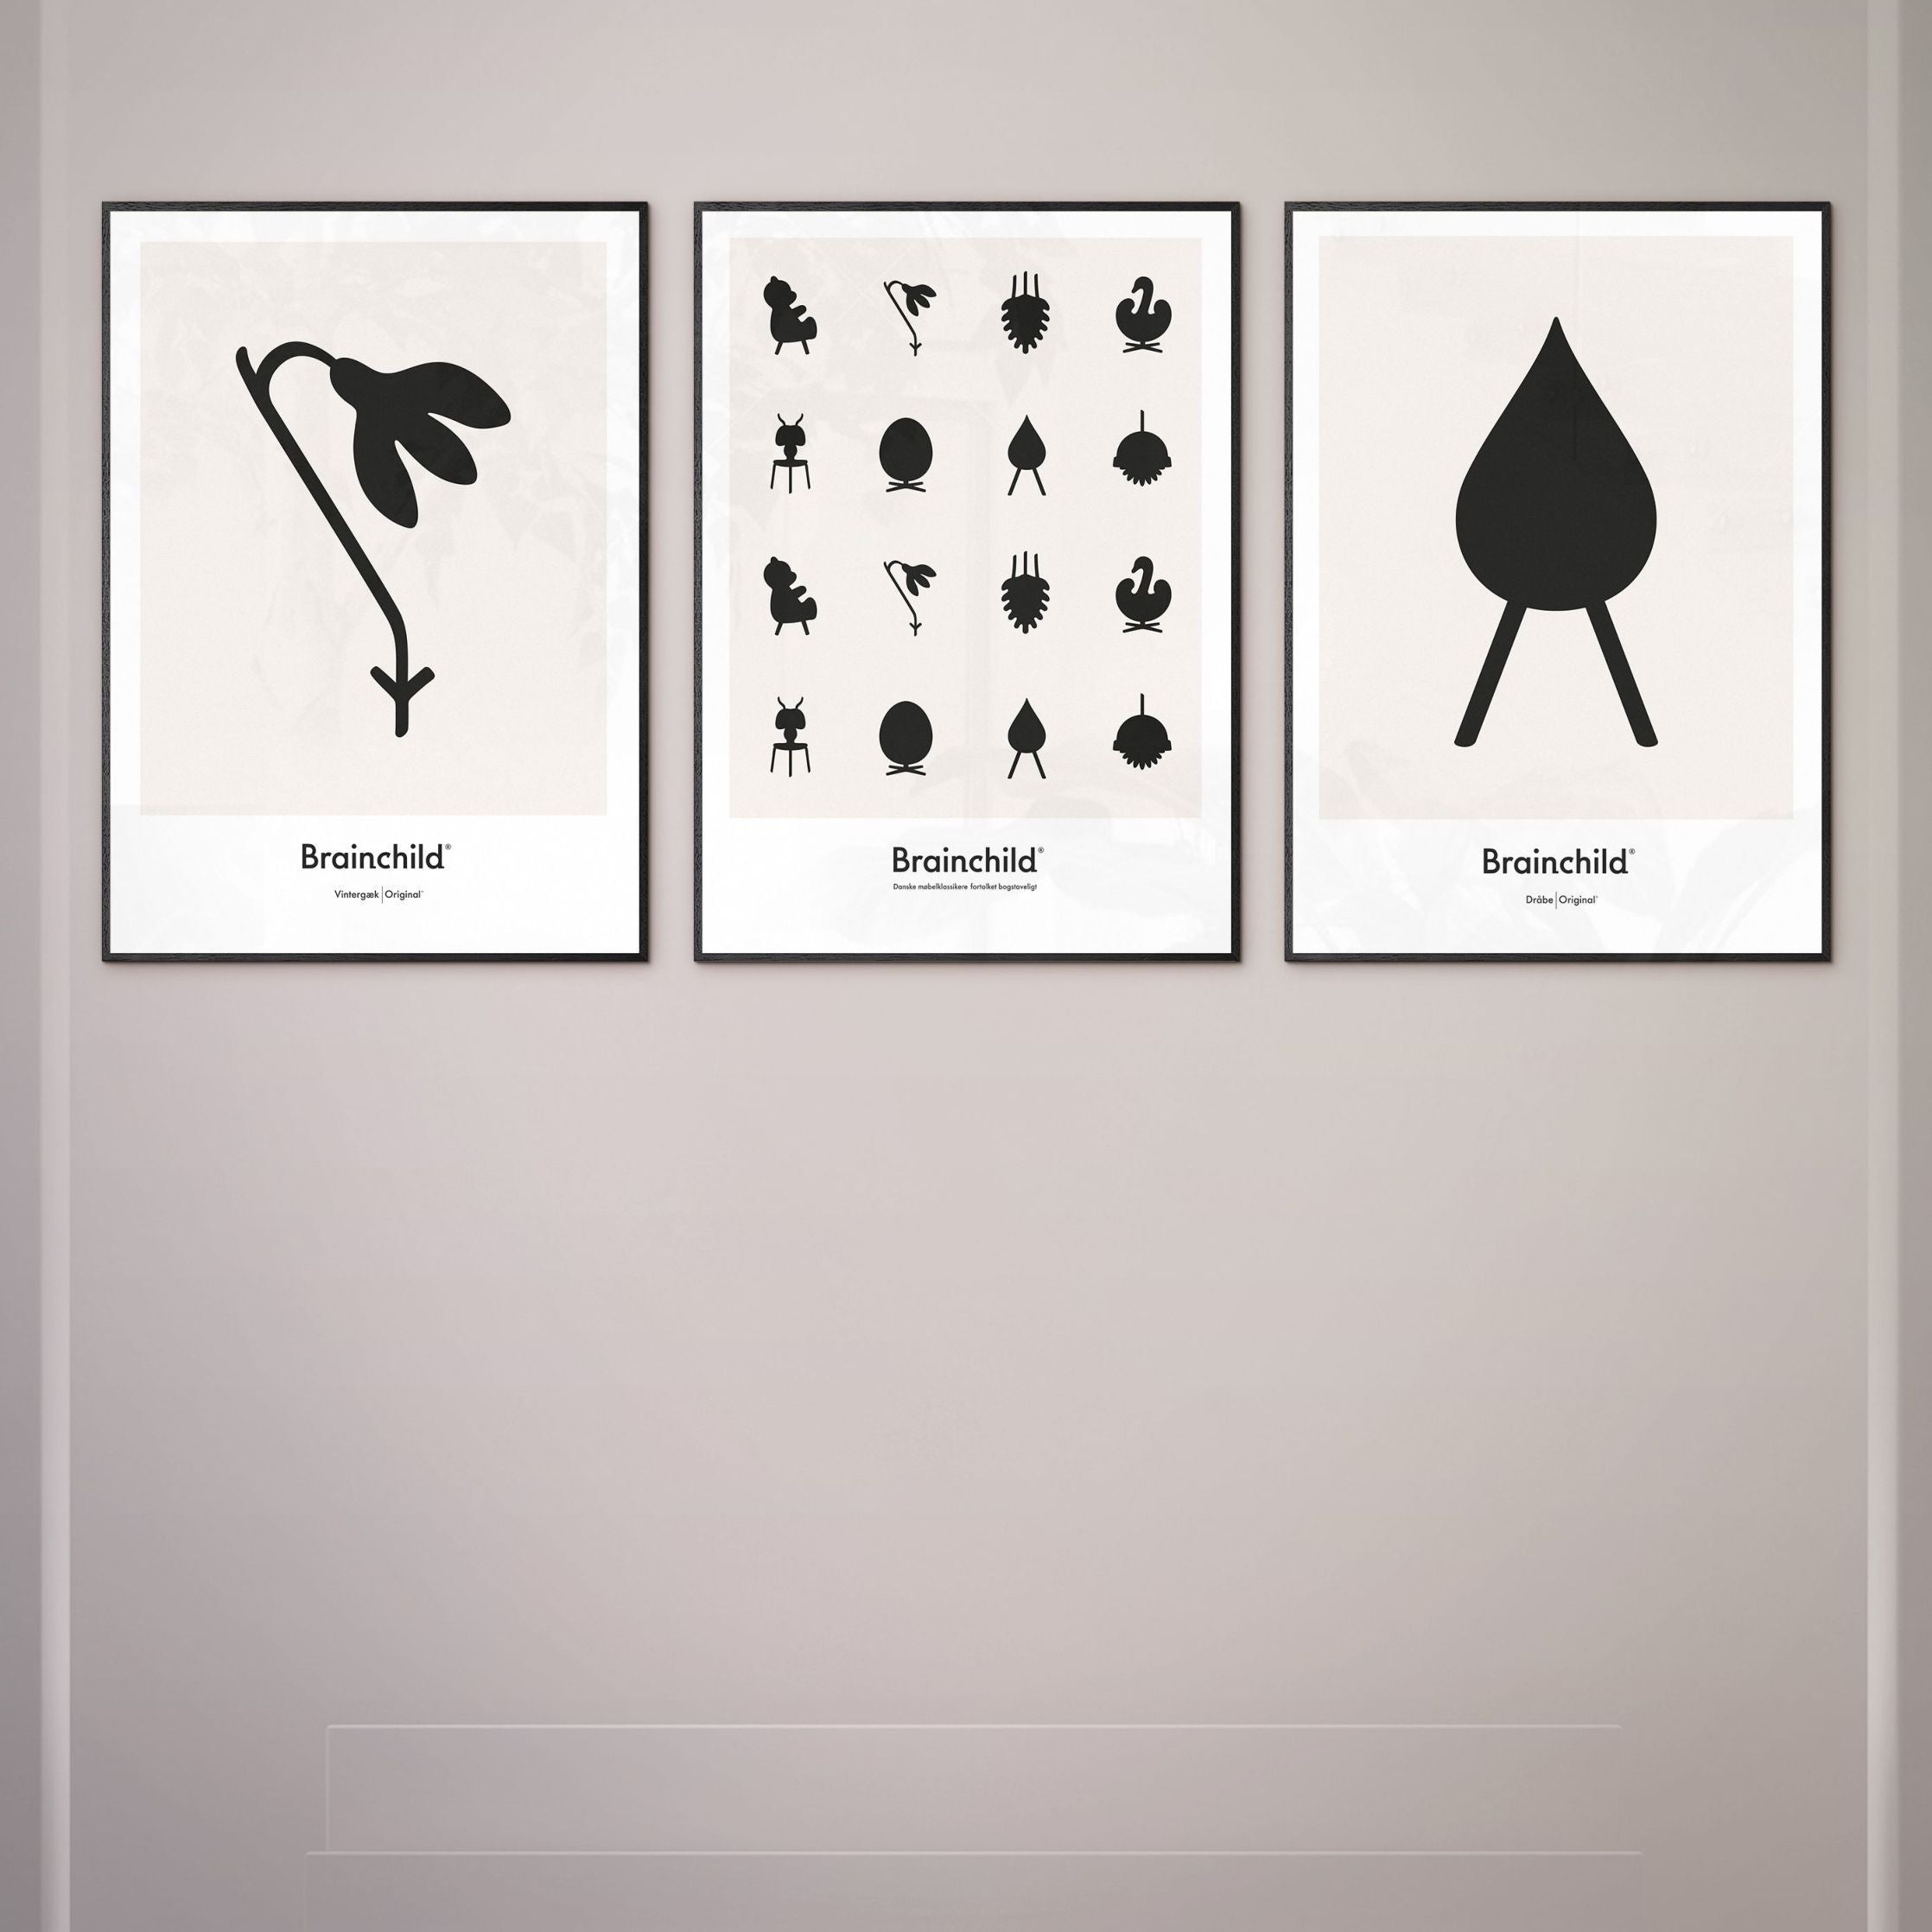 Brainchild Snowdrop Design Icon Poster, Frame Made Of Black Lacquered Wood 70 X100 Cm, Grey